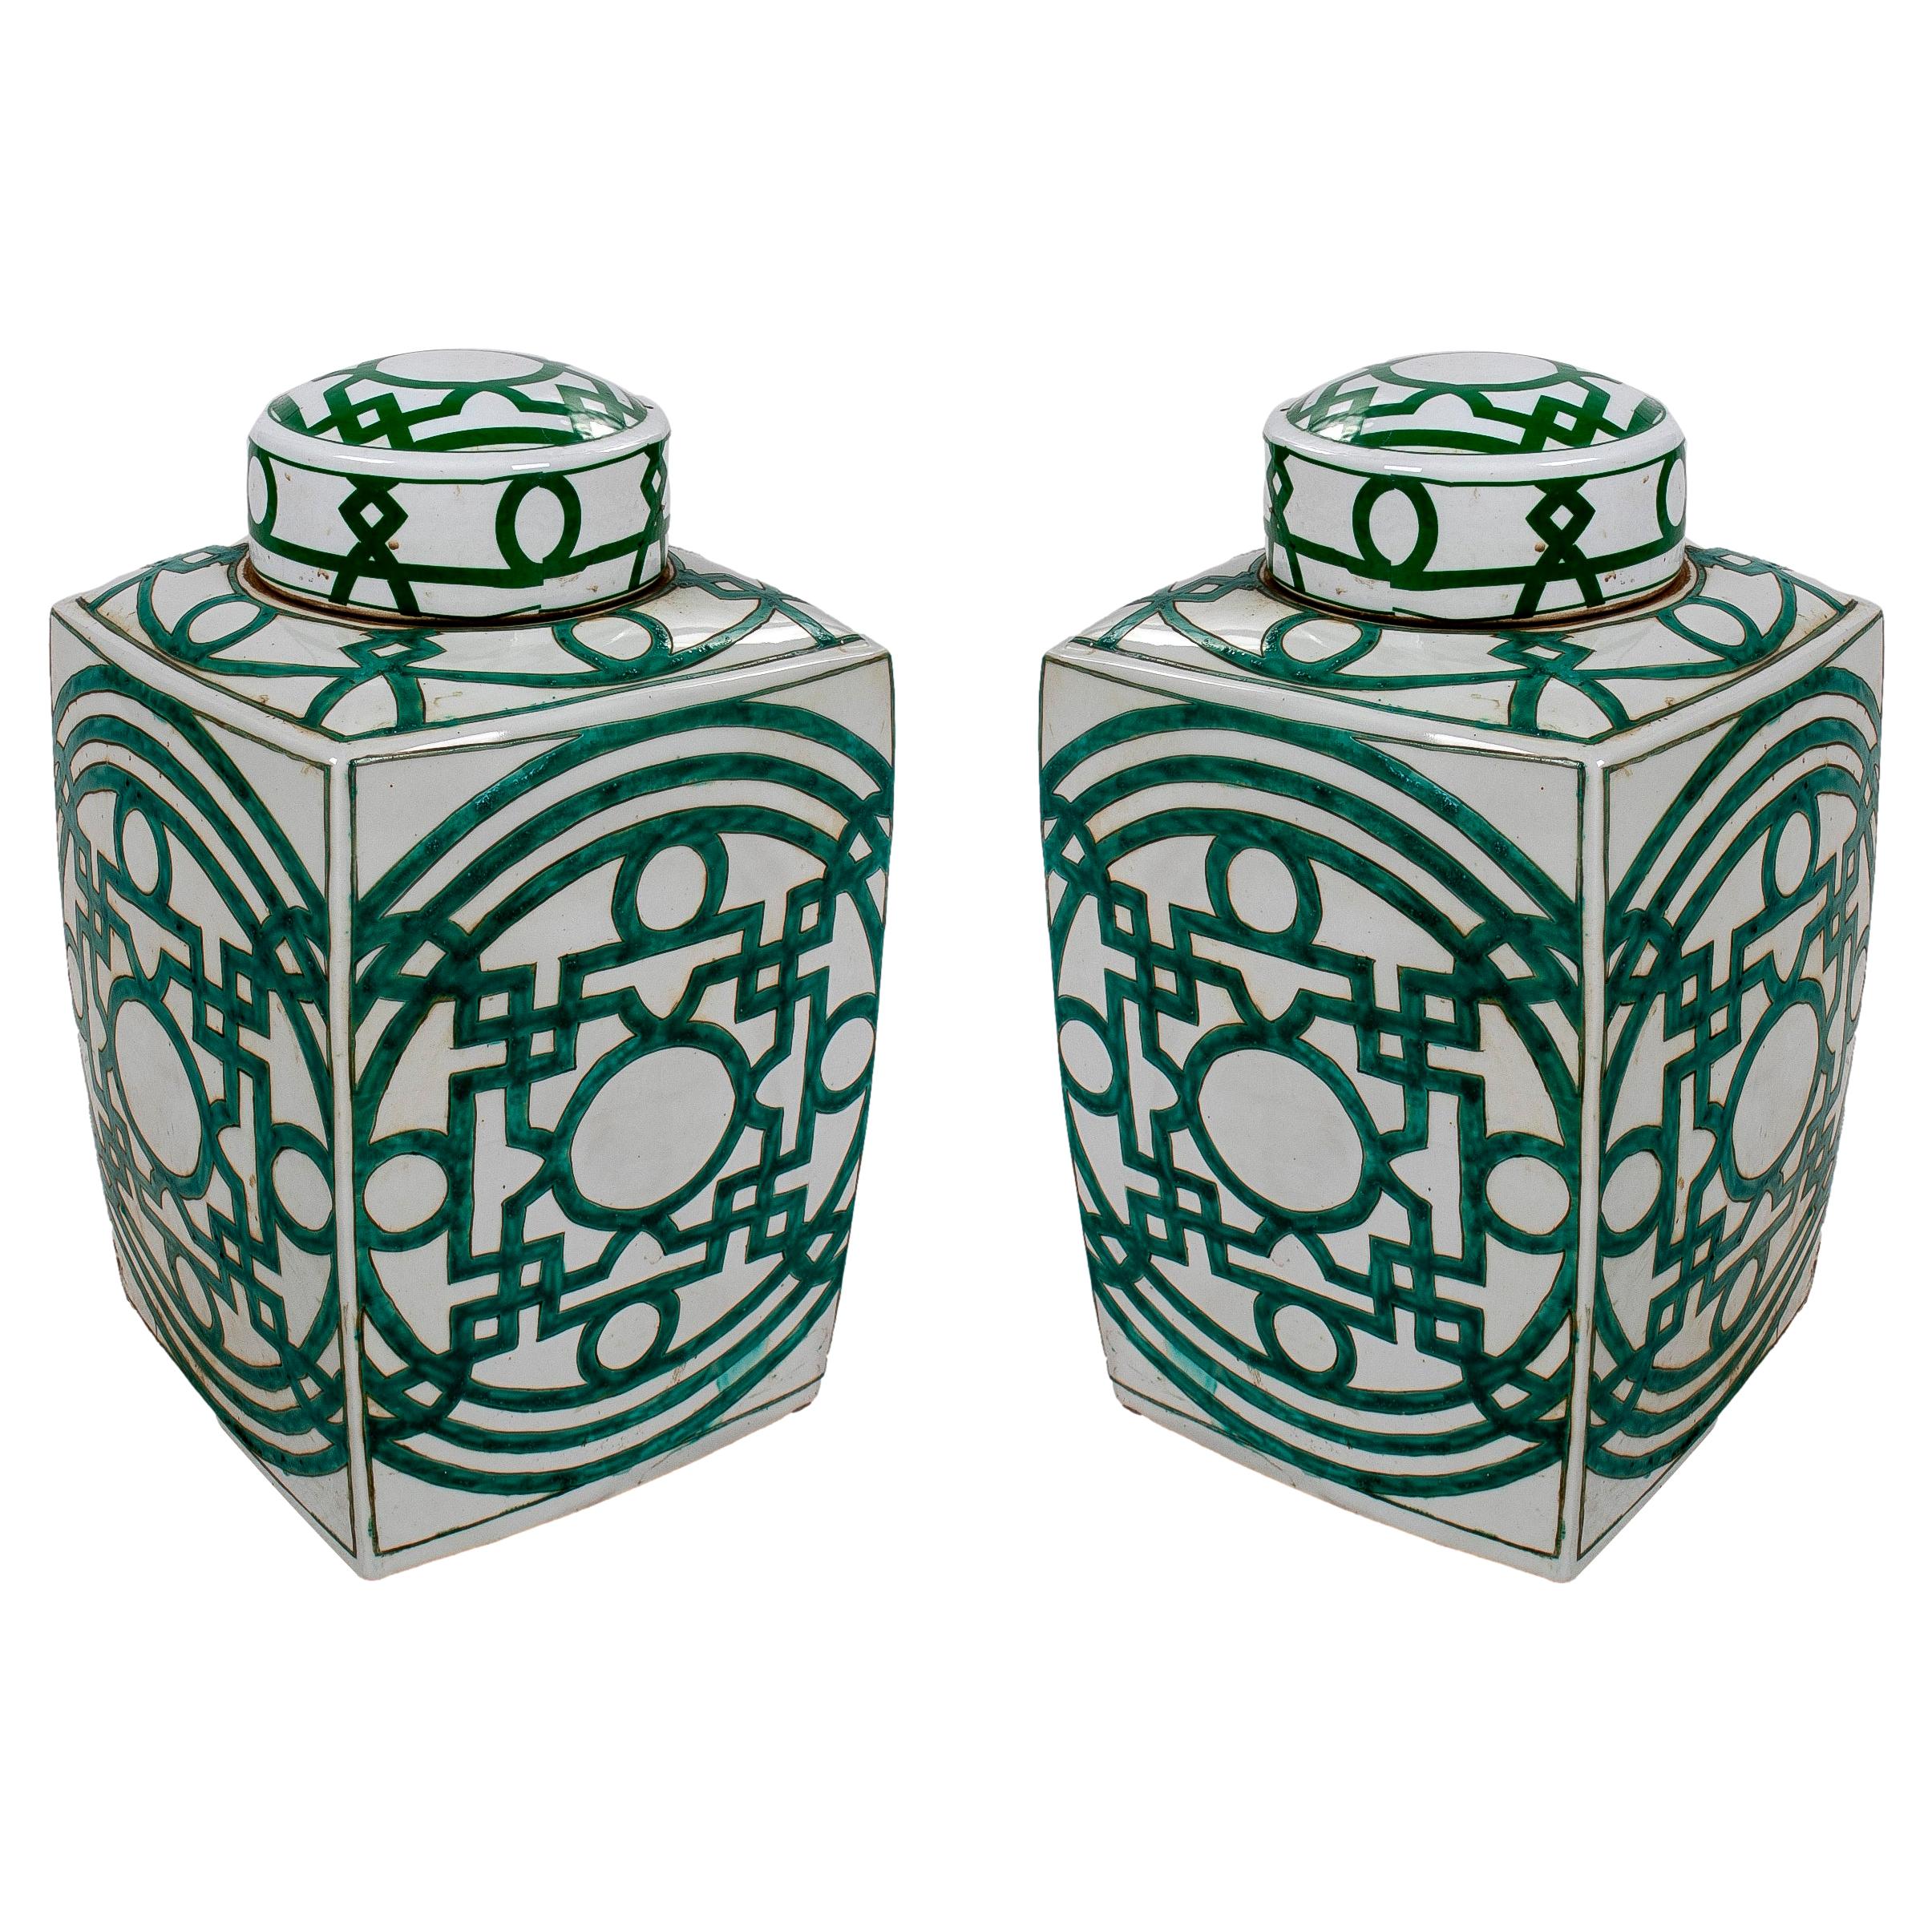 Pair of Asian White Glazed Porcelain Urns w/ Green Geometric Decorations & Lids For Sale